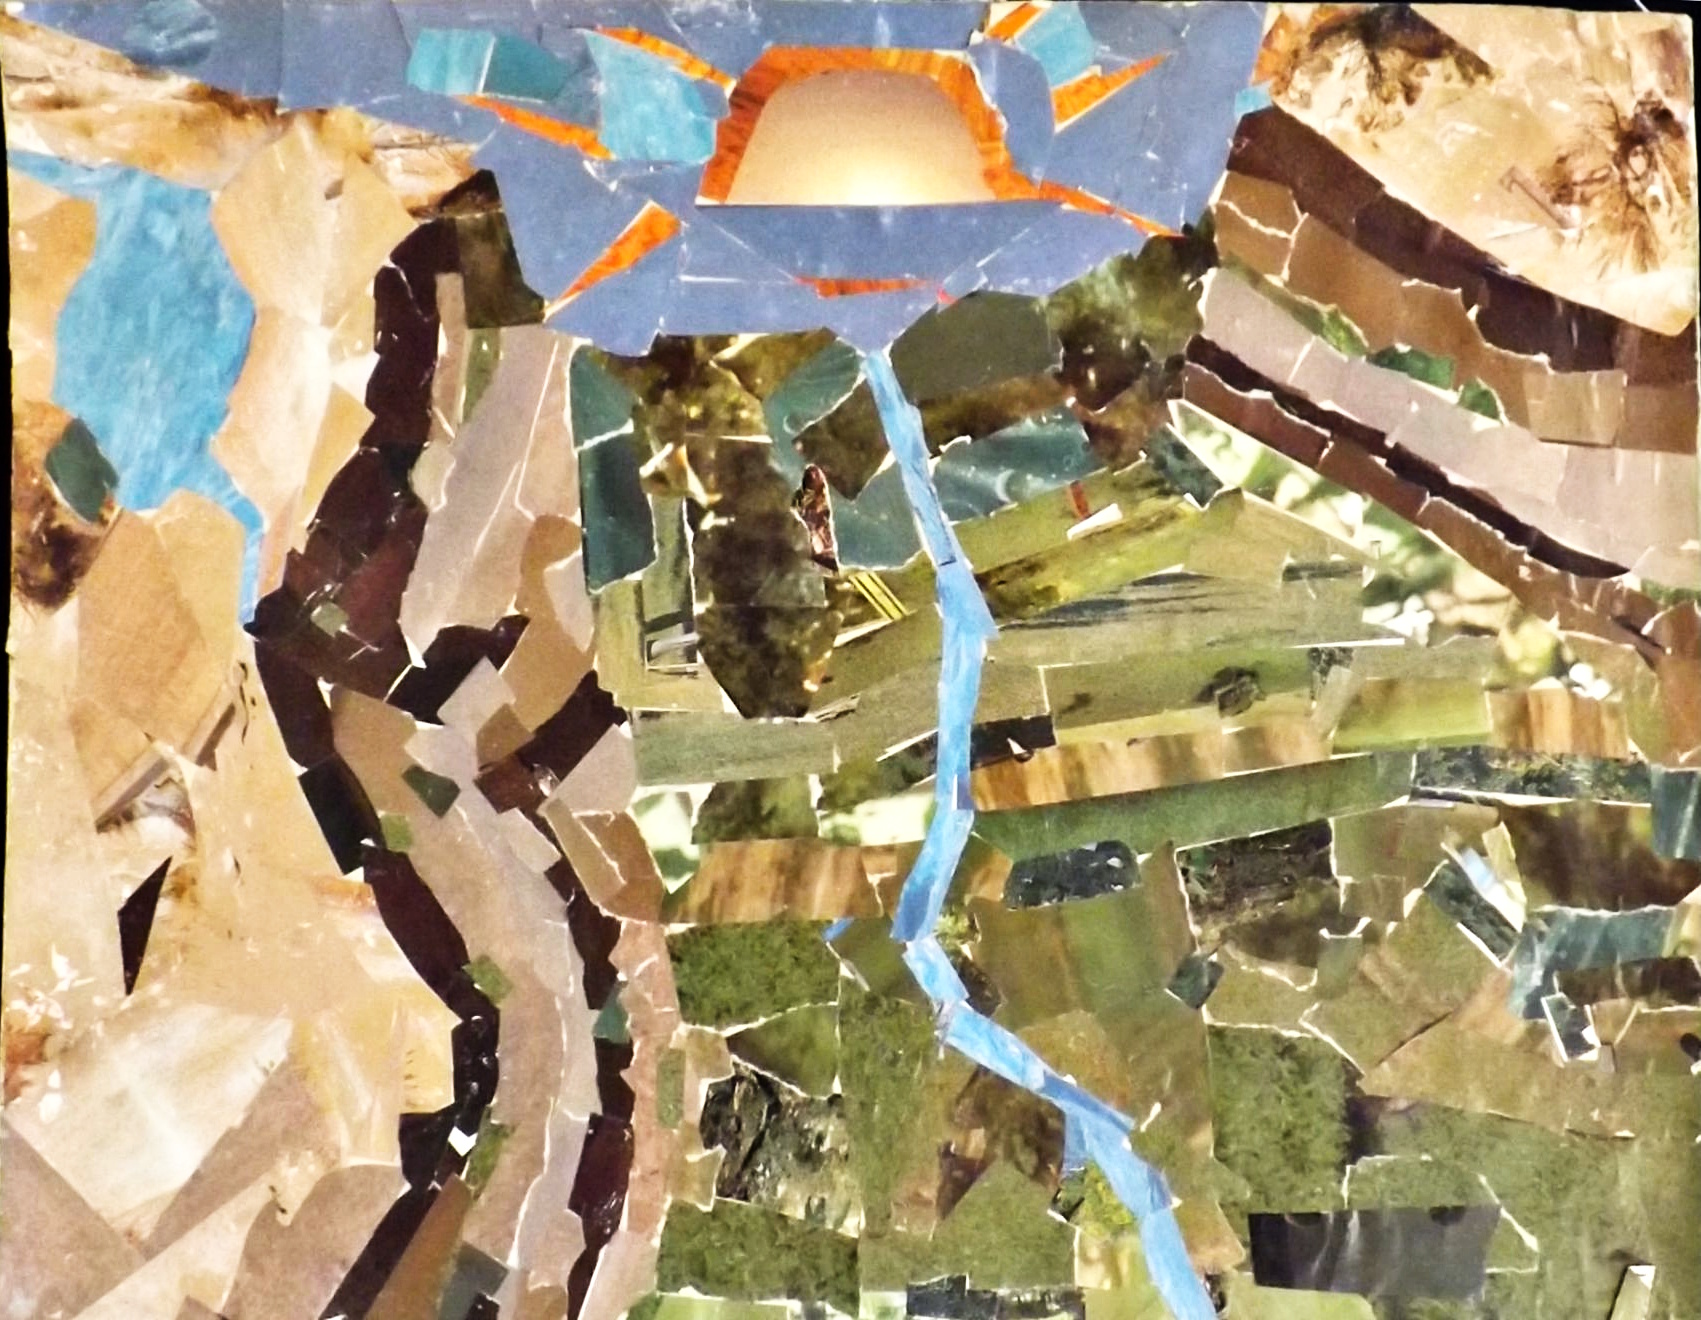 Tracing the path of a river that glints in the dawn while snaking through rice fields. Paper mosaic created circa 1985.